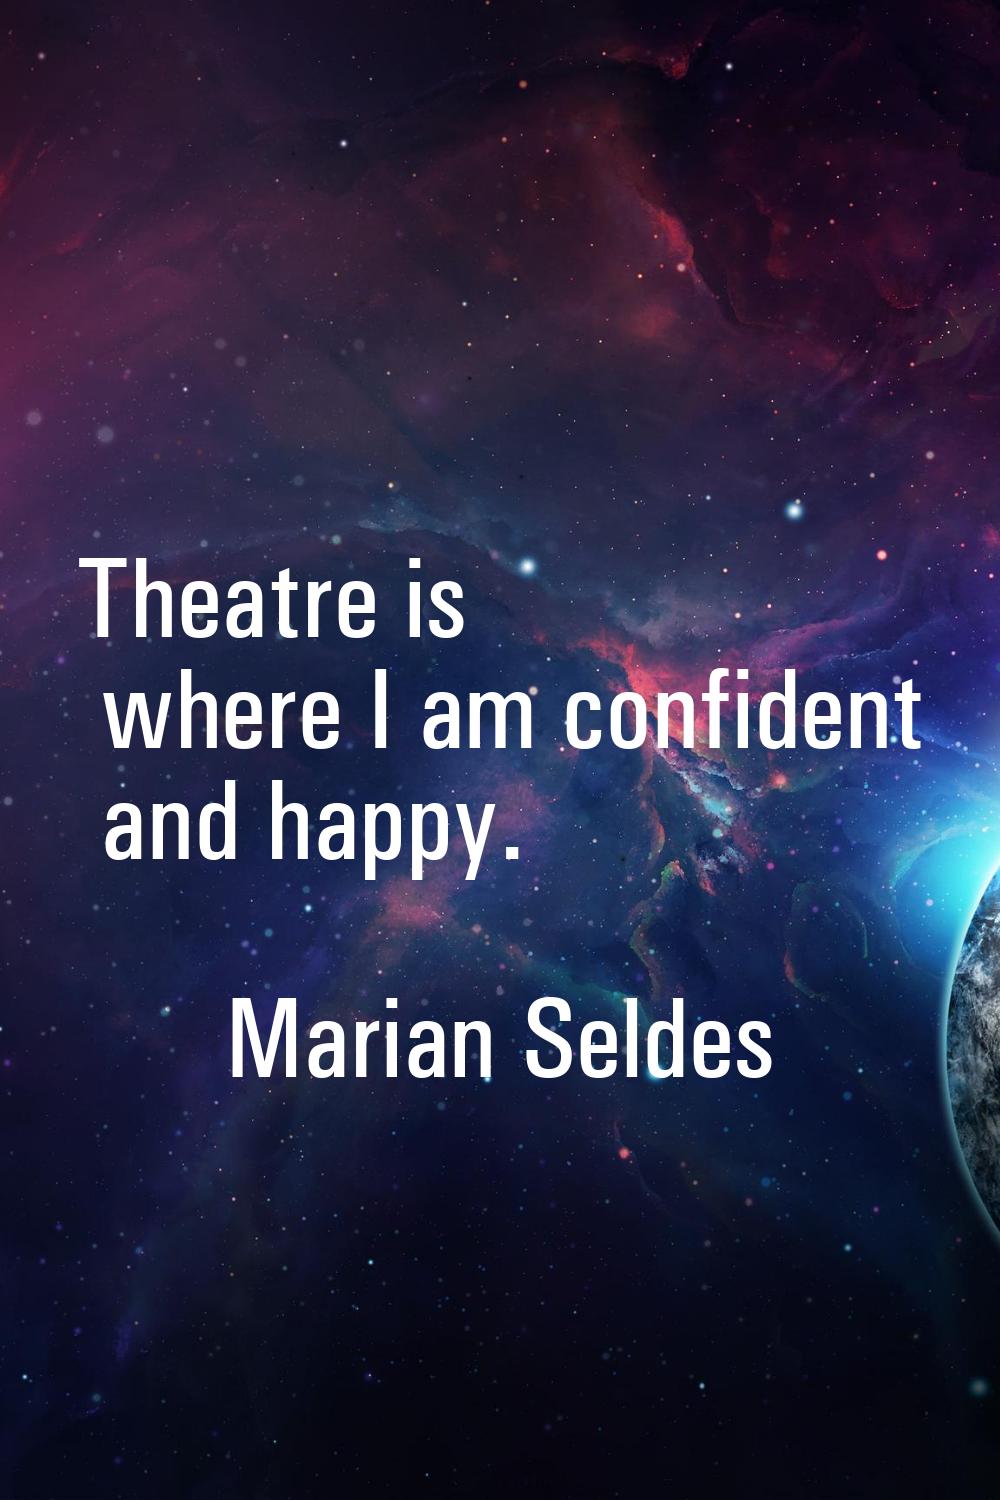 Theatre is where I am confident and happy.